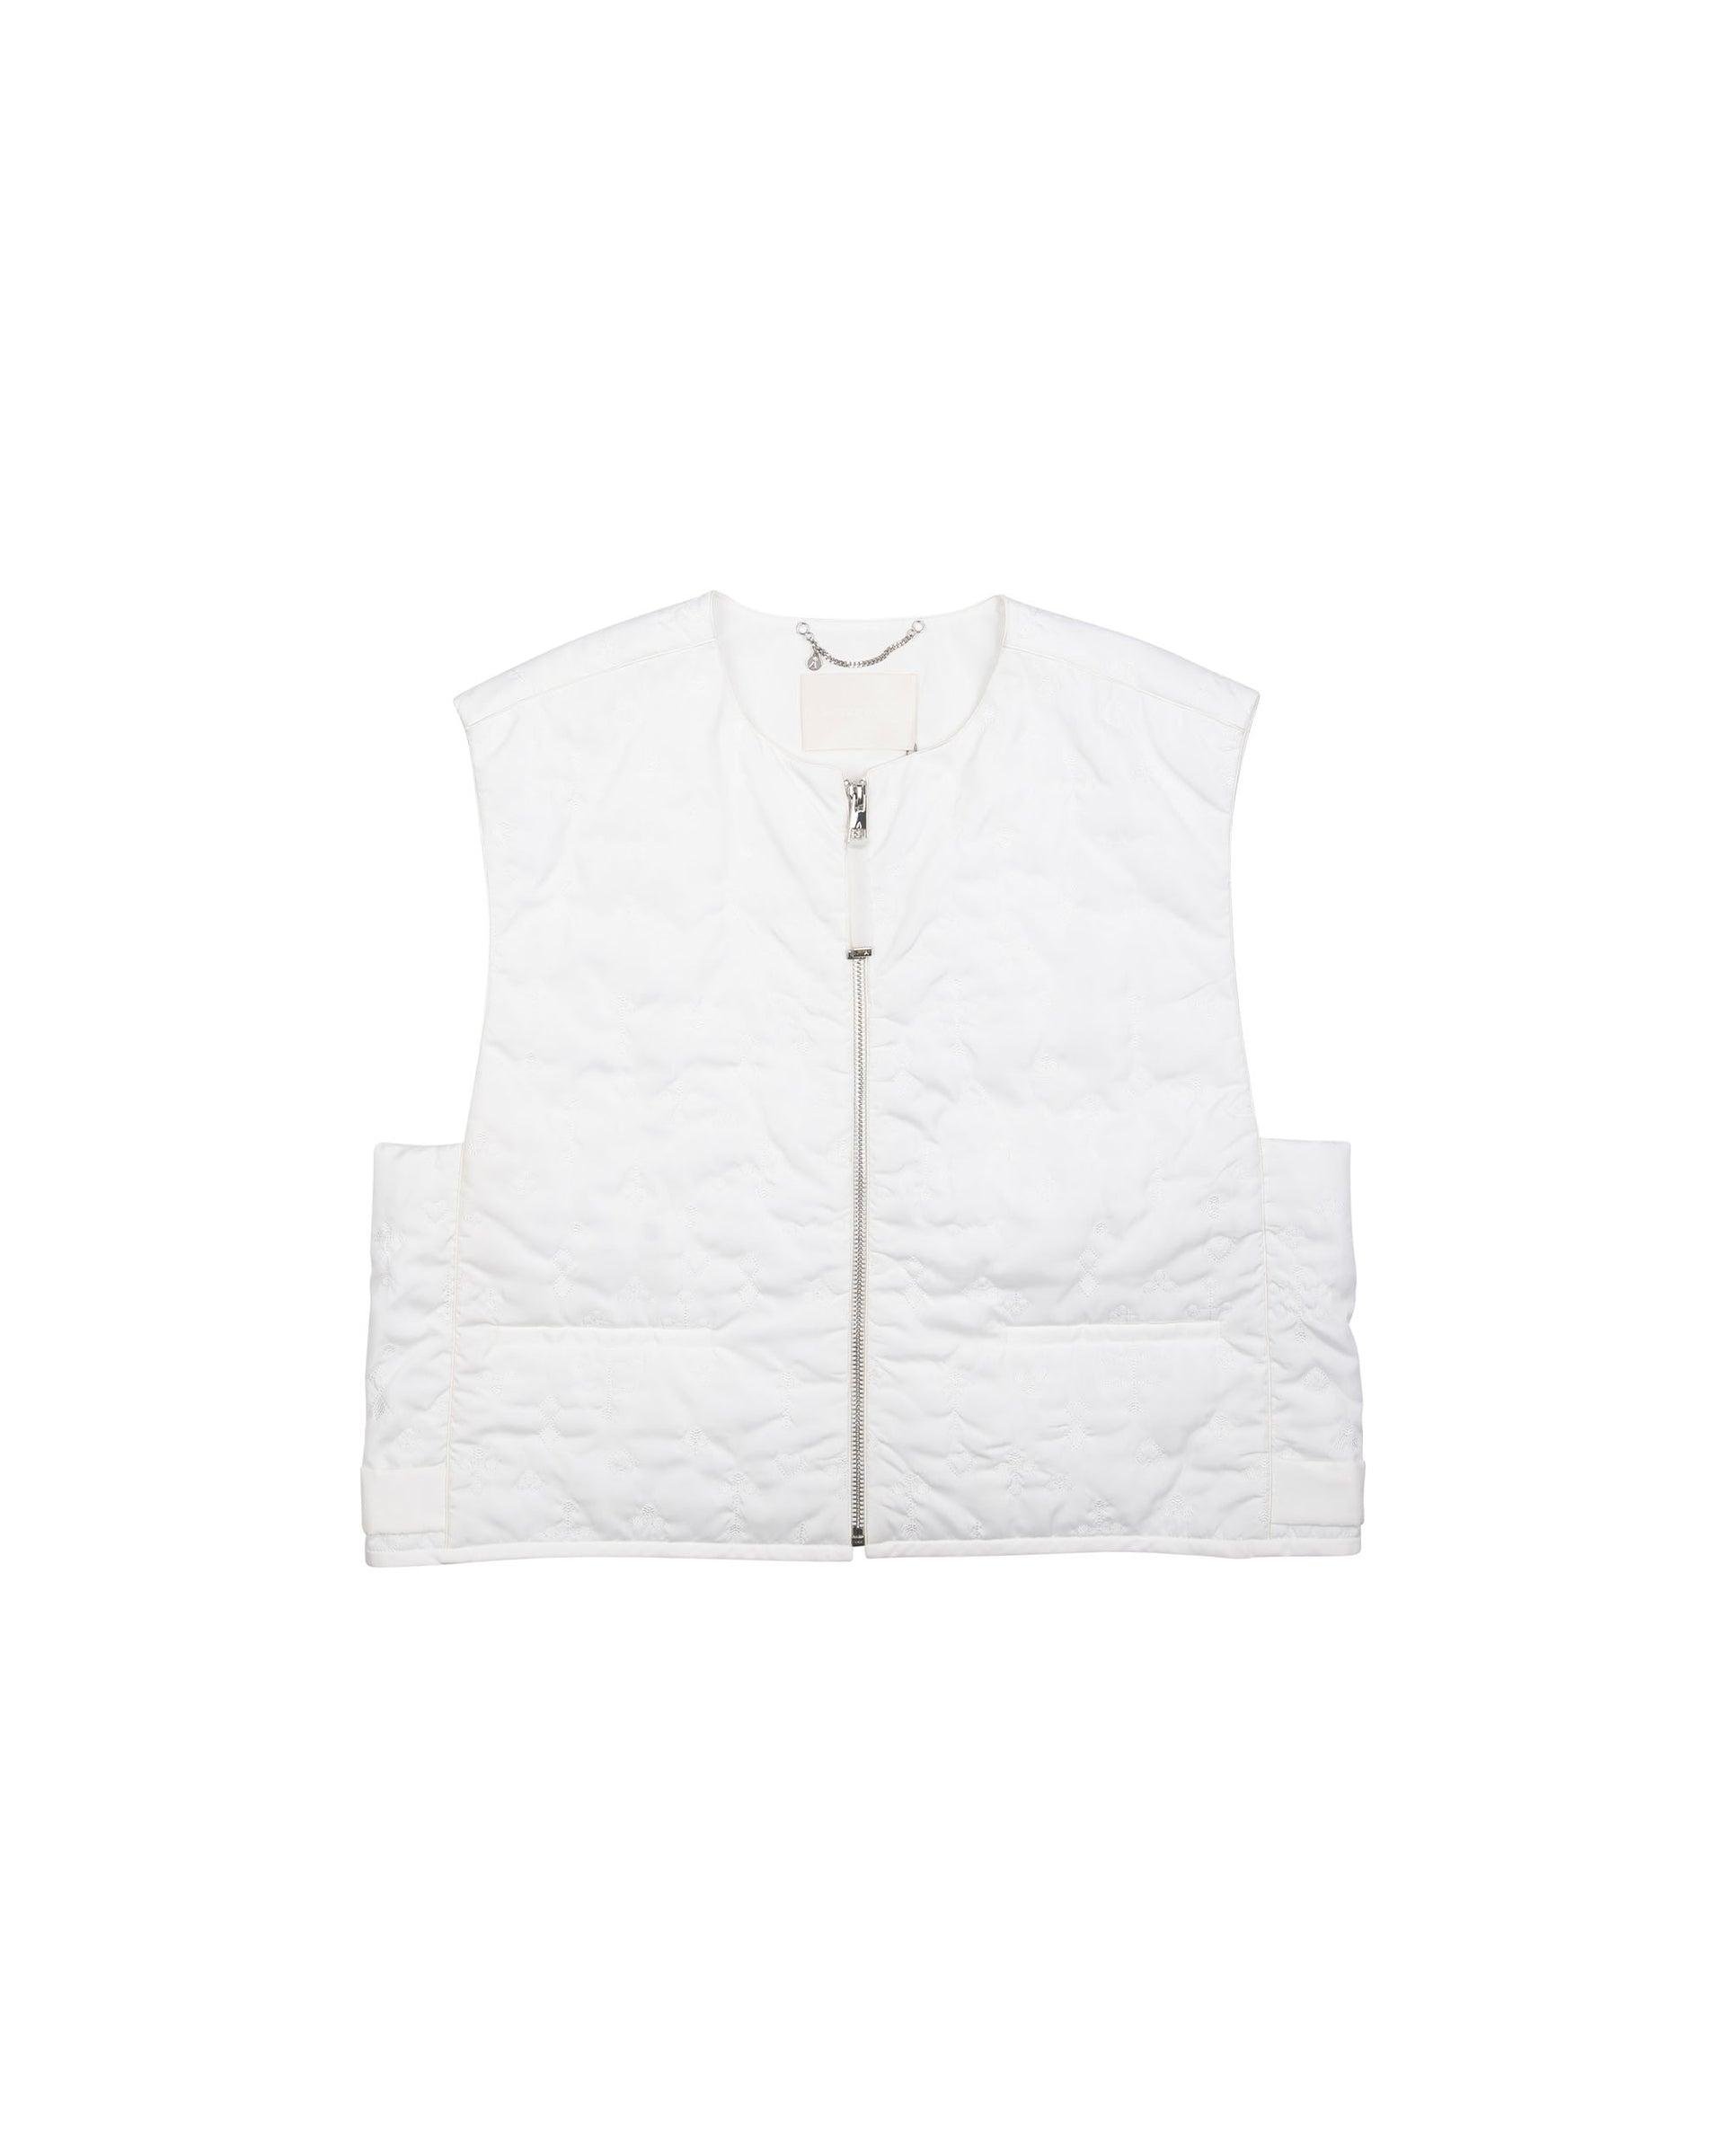 Thermal Trapuntato Vest by ANTEPRIMA